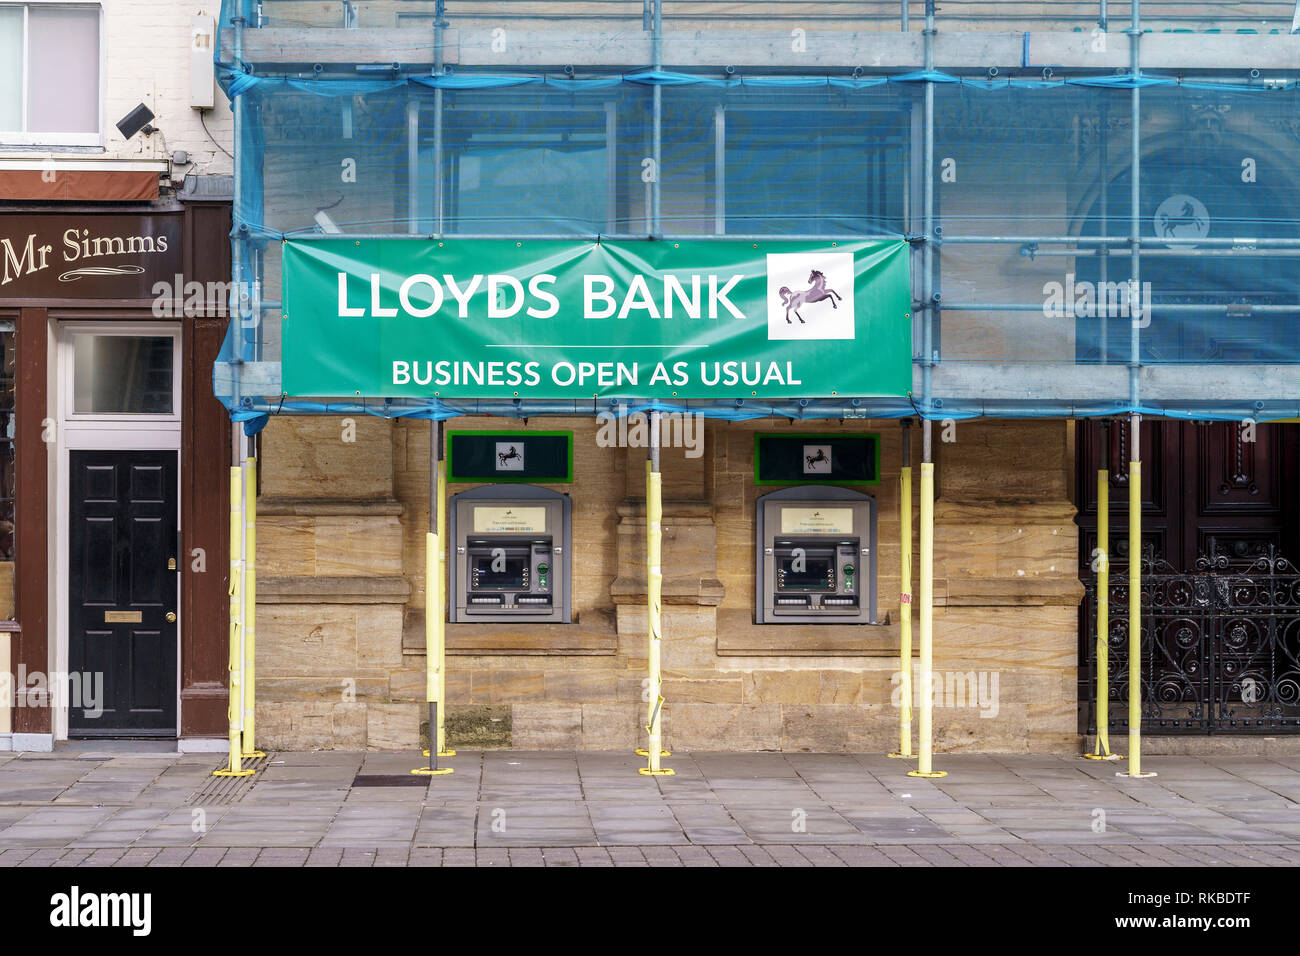 Refurbishment of a branch of Lloyds bank with banner and ATM cash machines Stock Photo